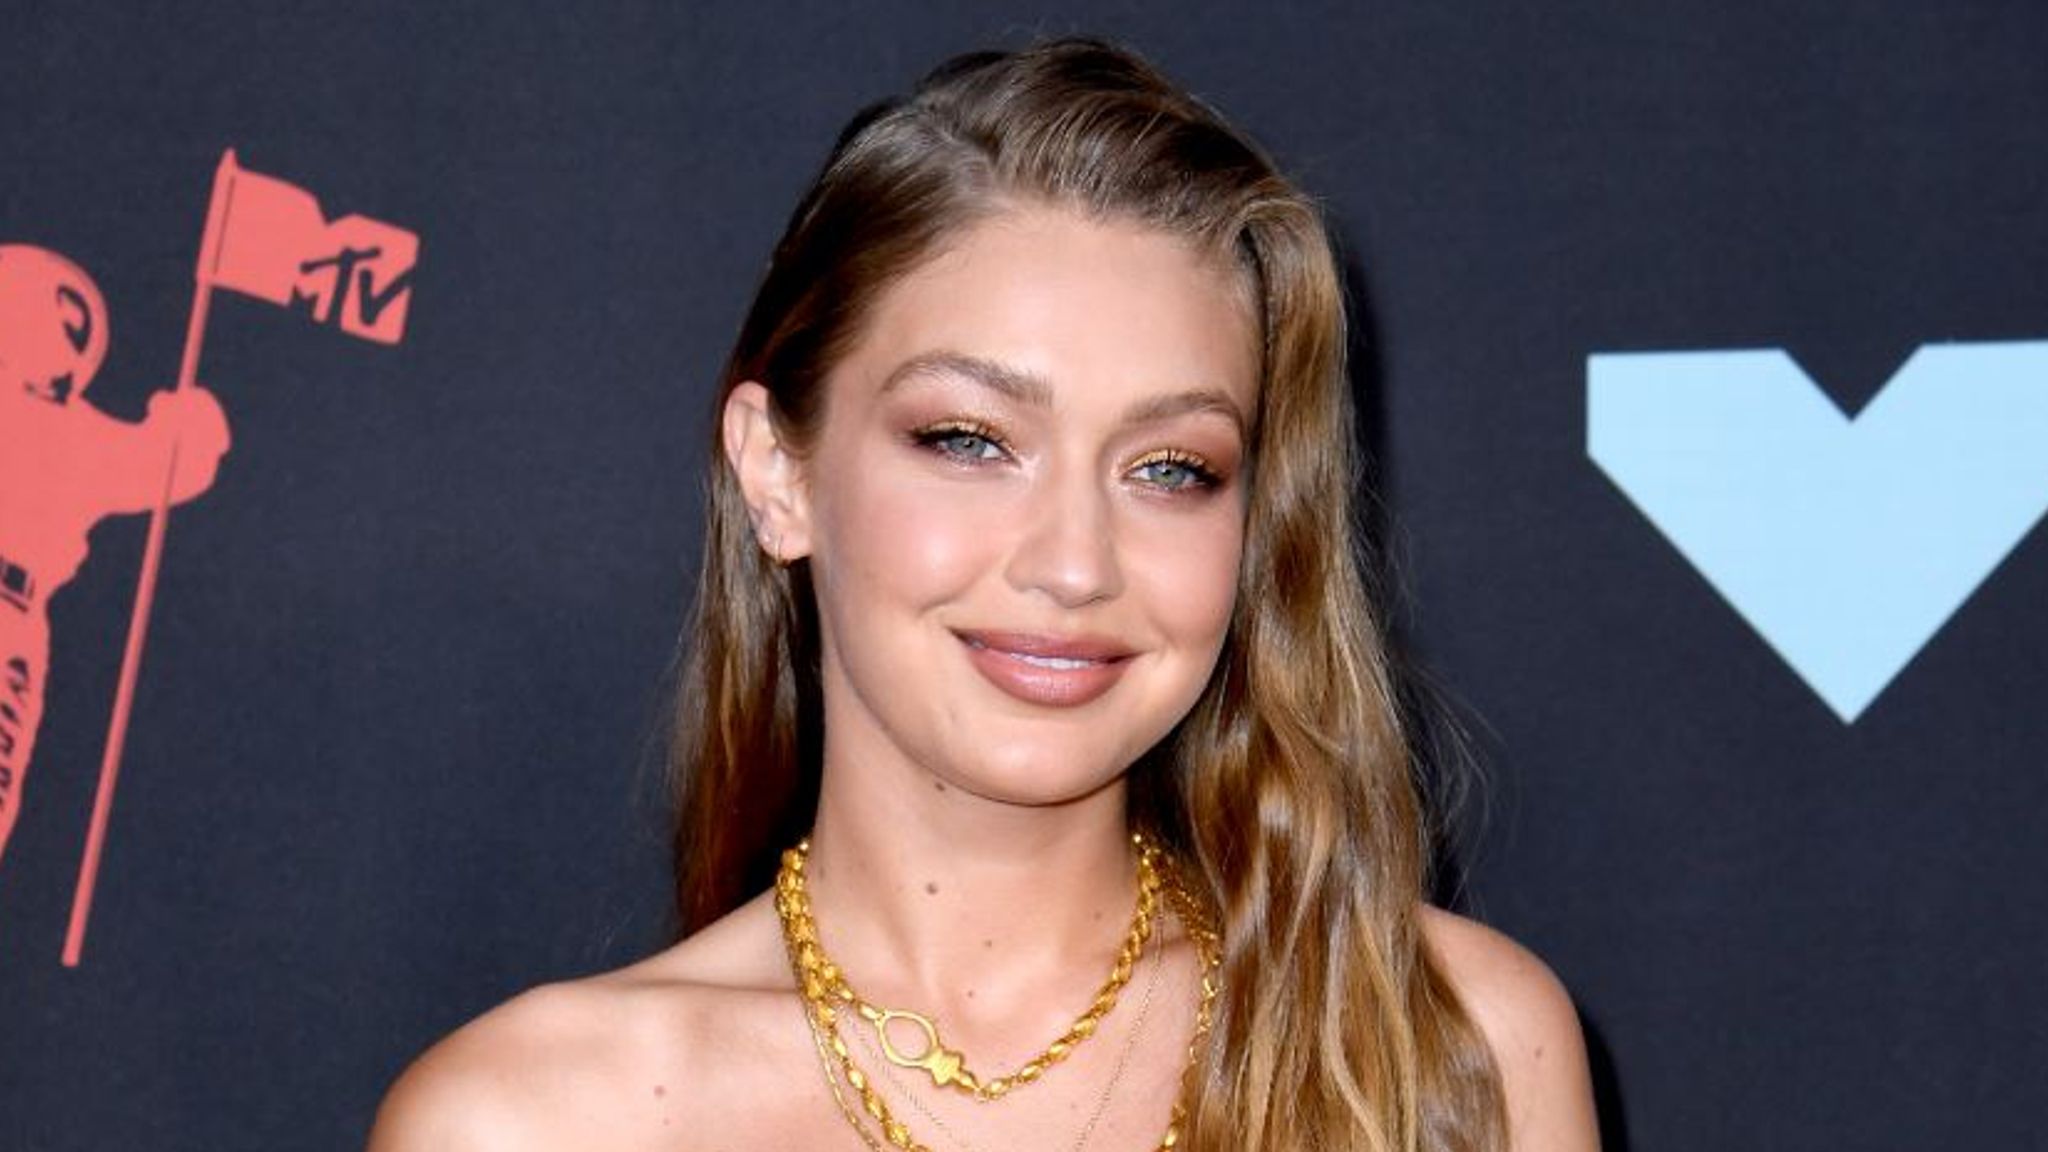 Gigi Hadid poses for Vogue cover 10 weeks after giving birth to daughter  Khai, Ents & Arts News